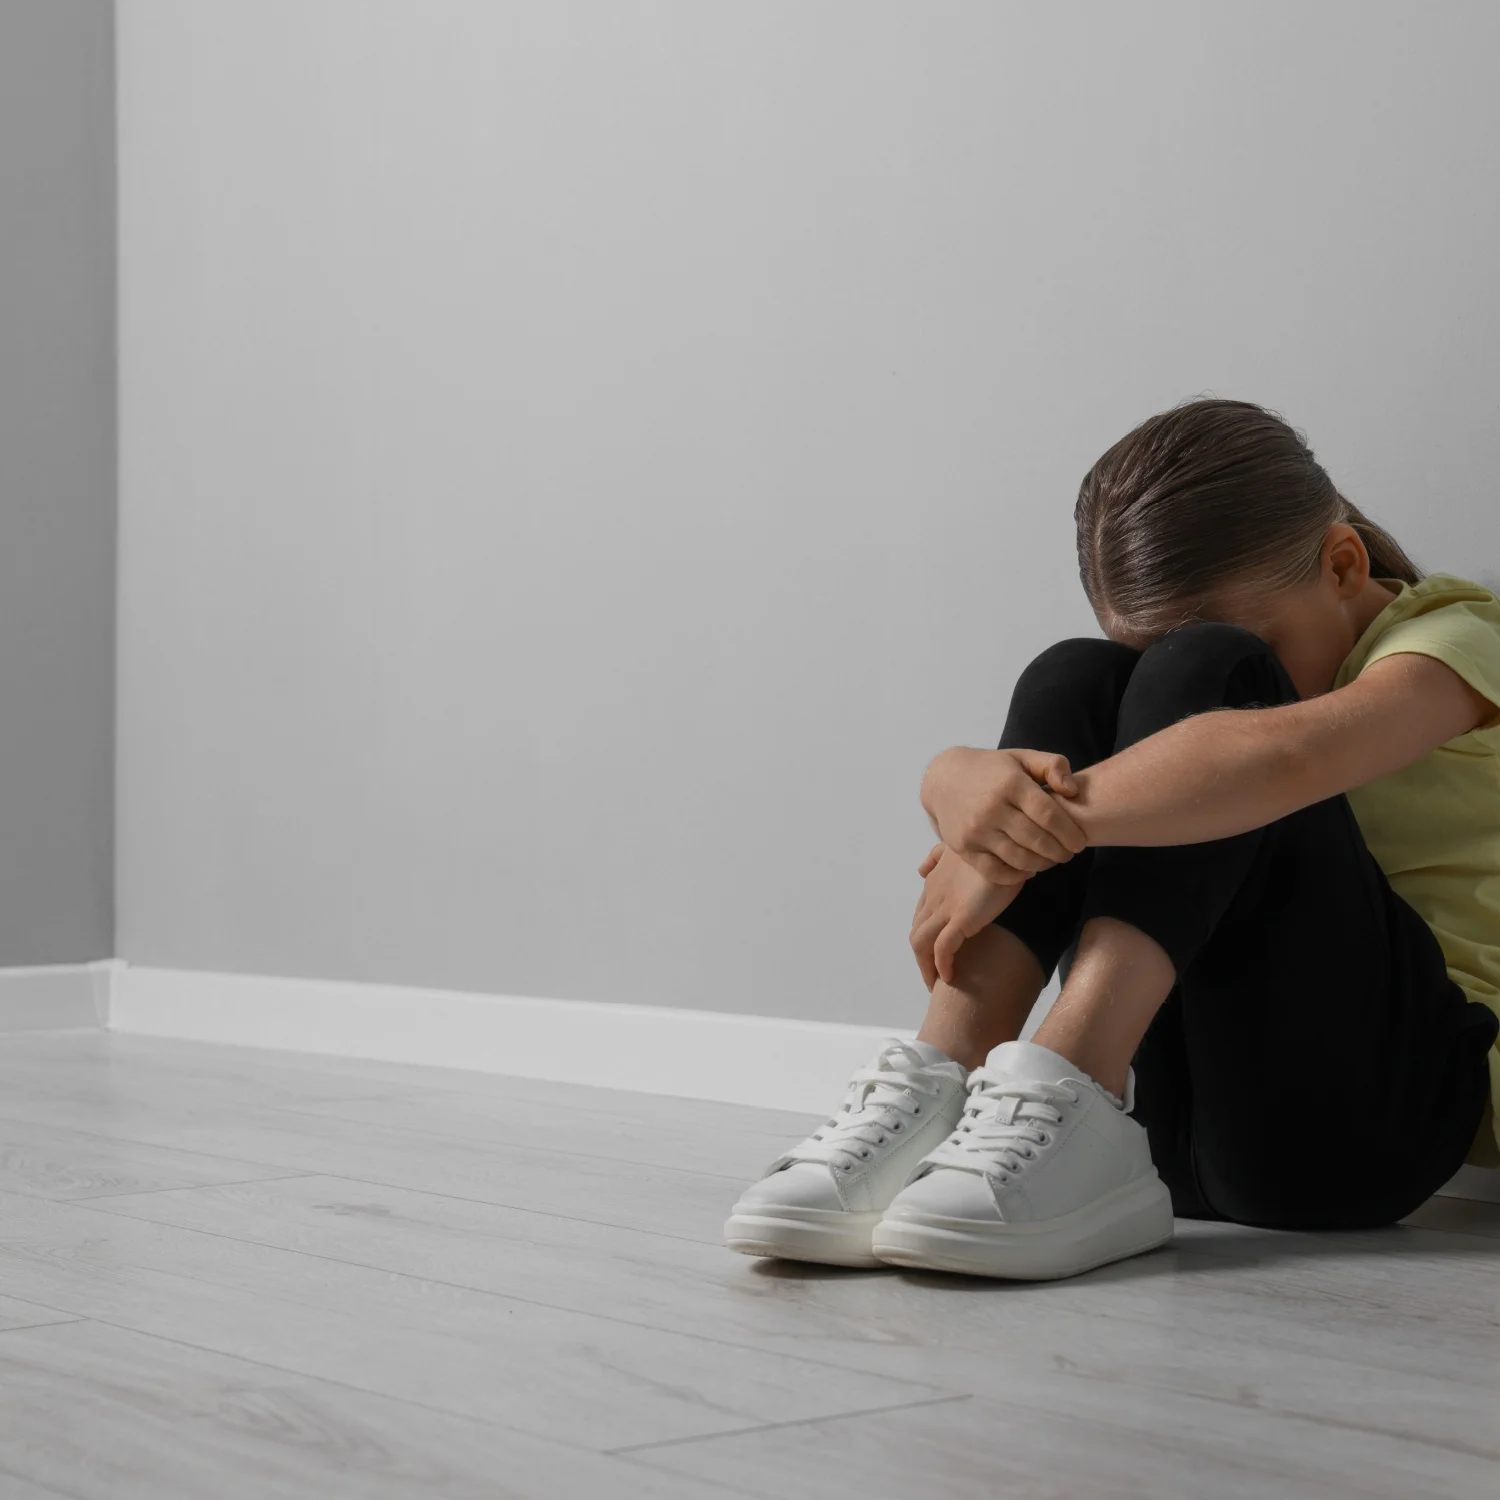 Neglecting Child’s Emotions